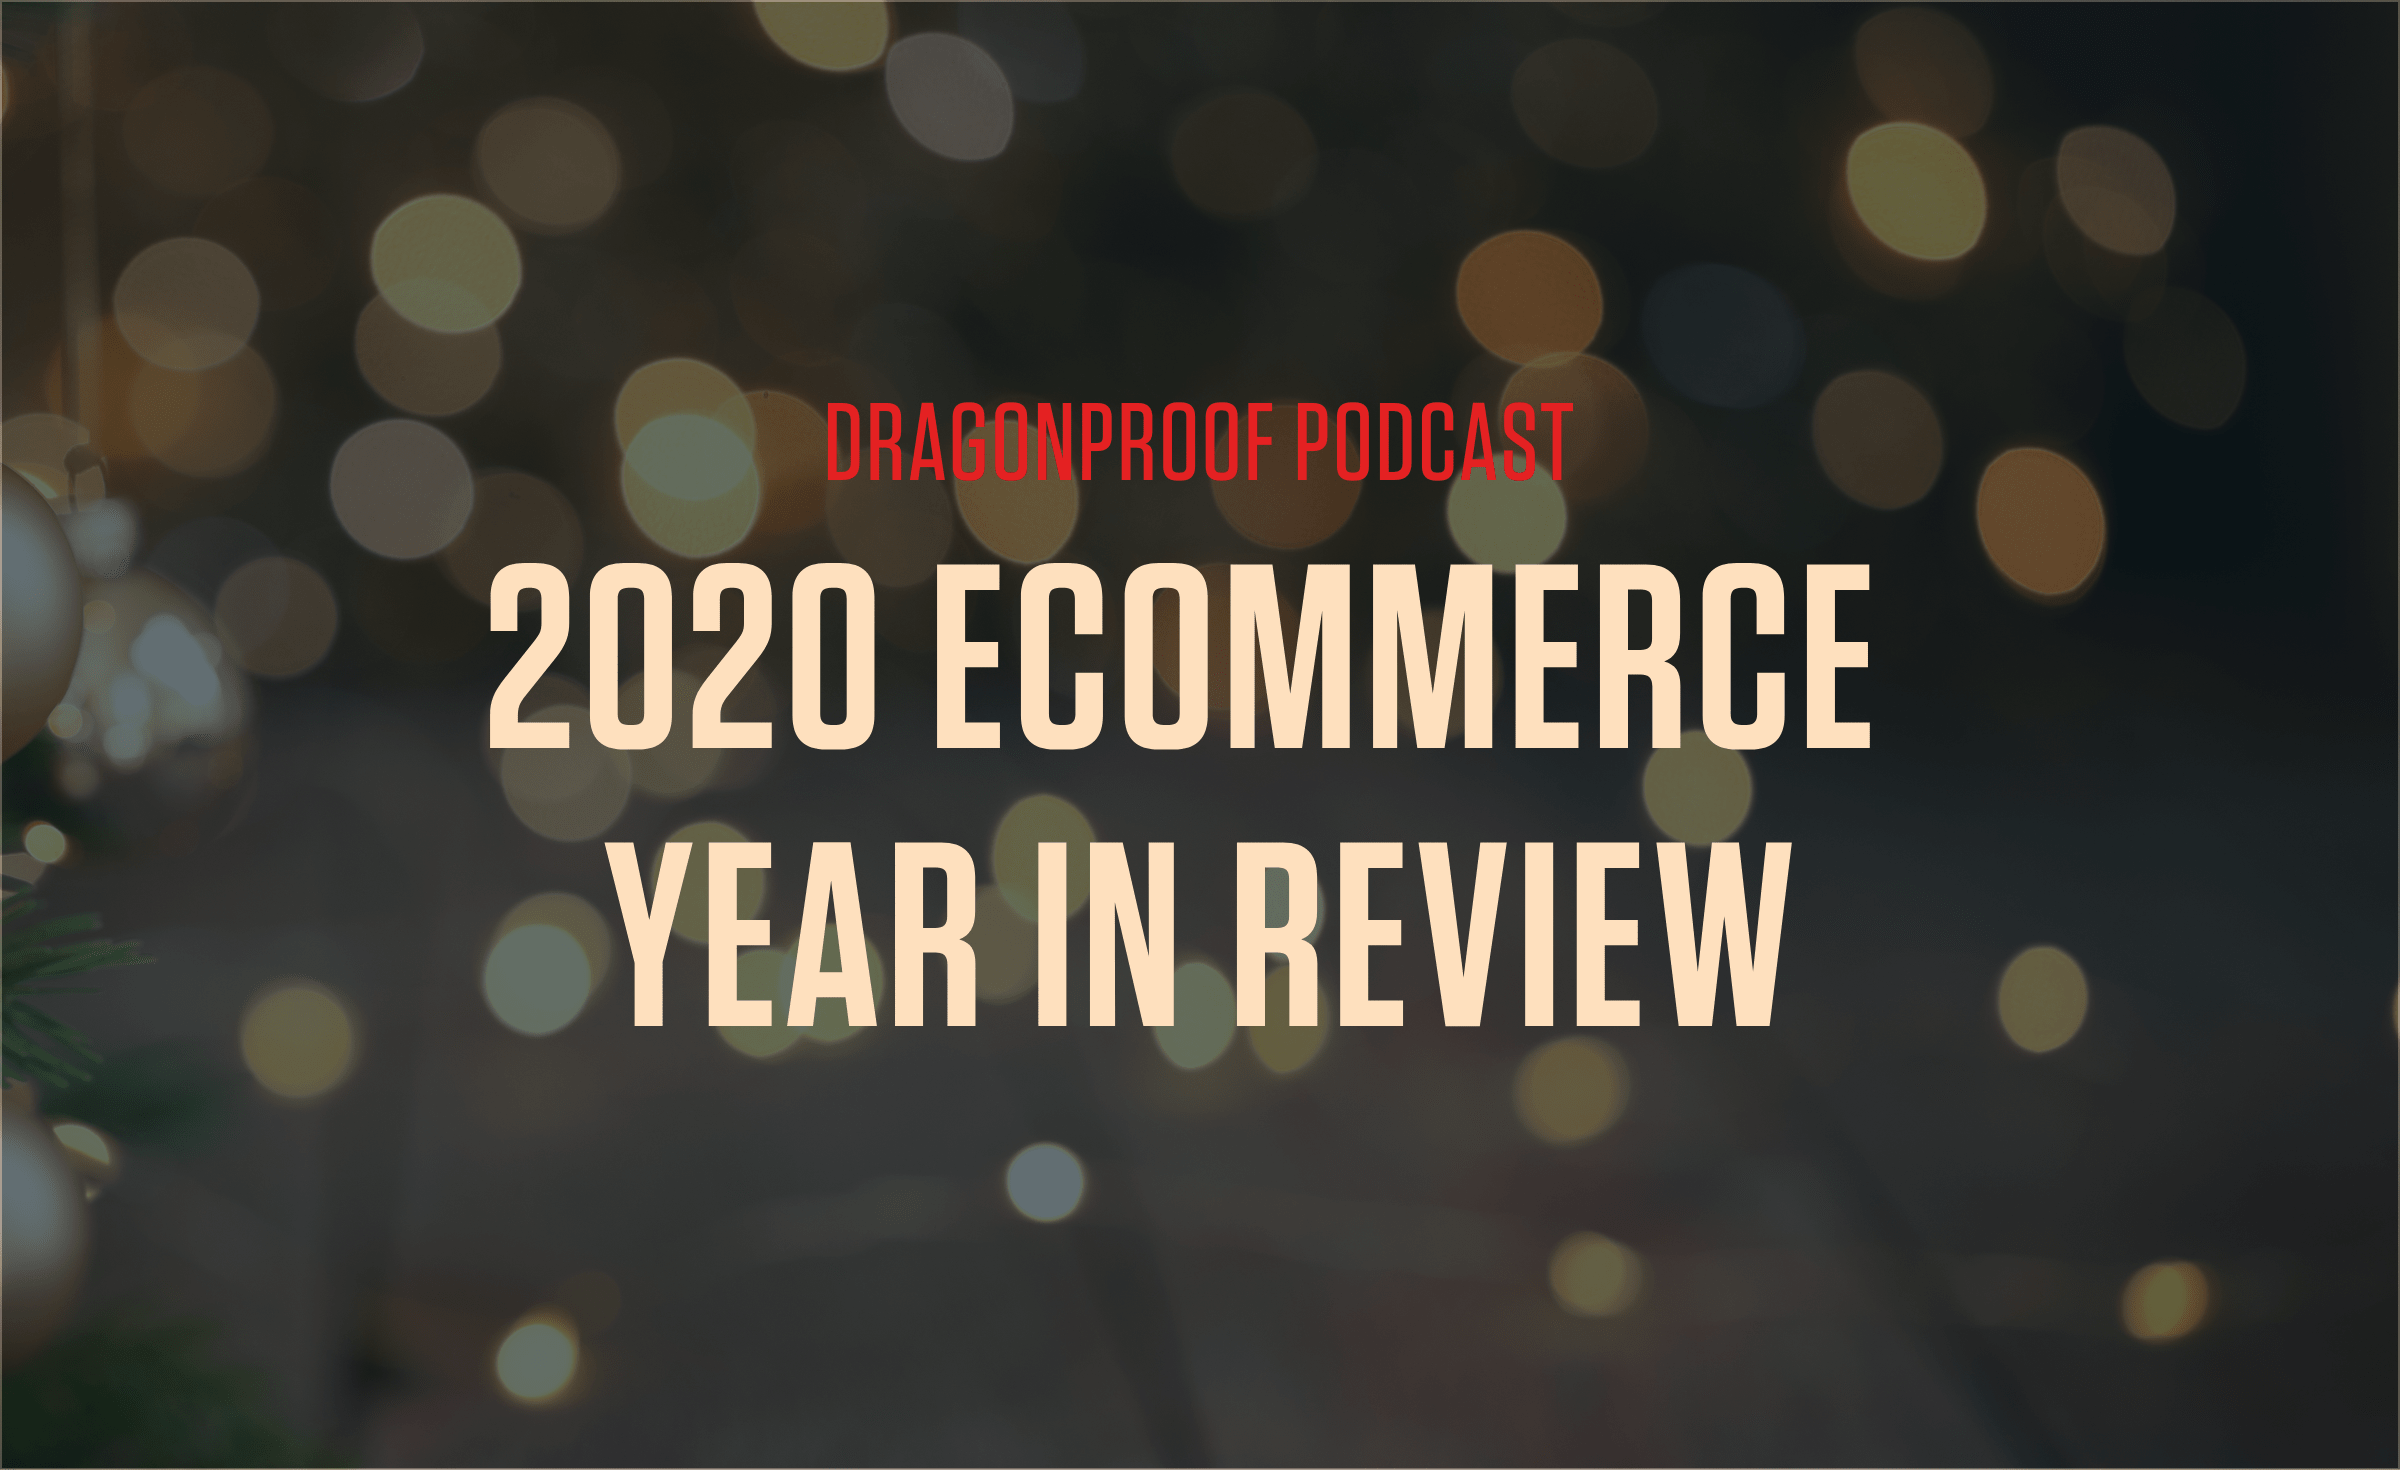 Dragonproof Podcast Title Card - 2020 Ecommerce Year in Review